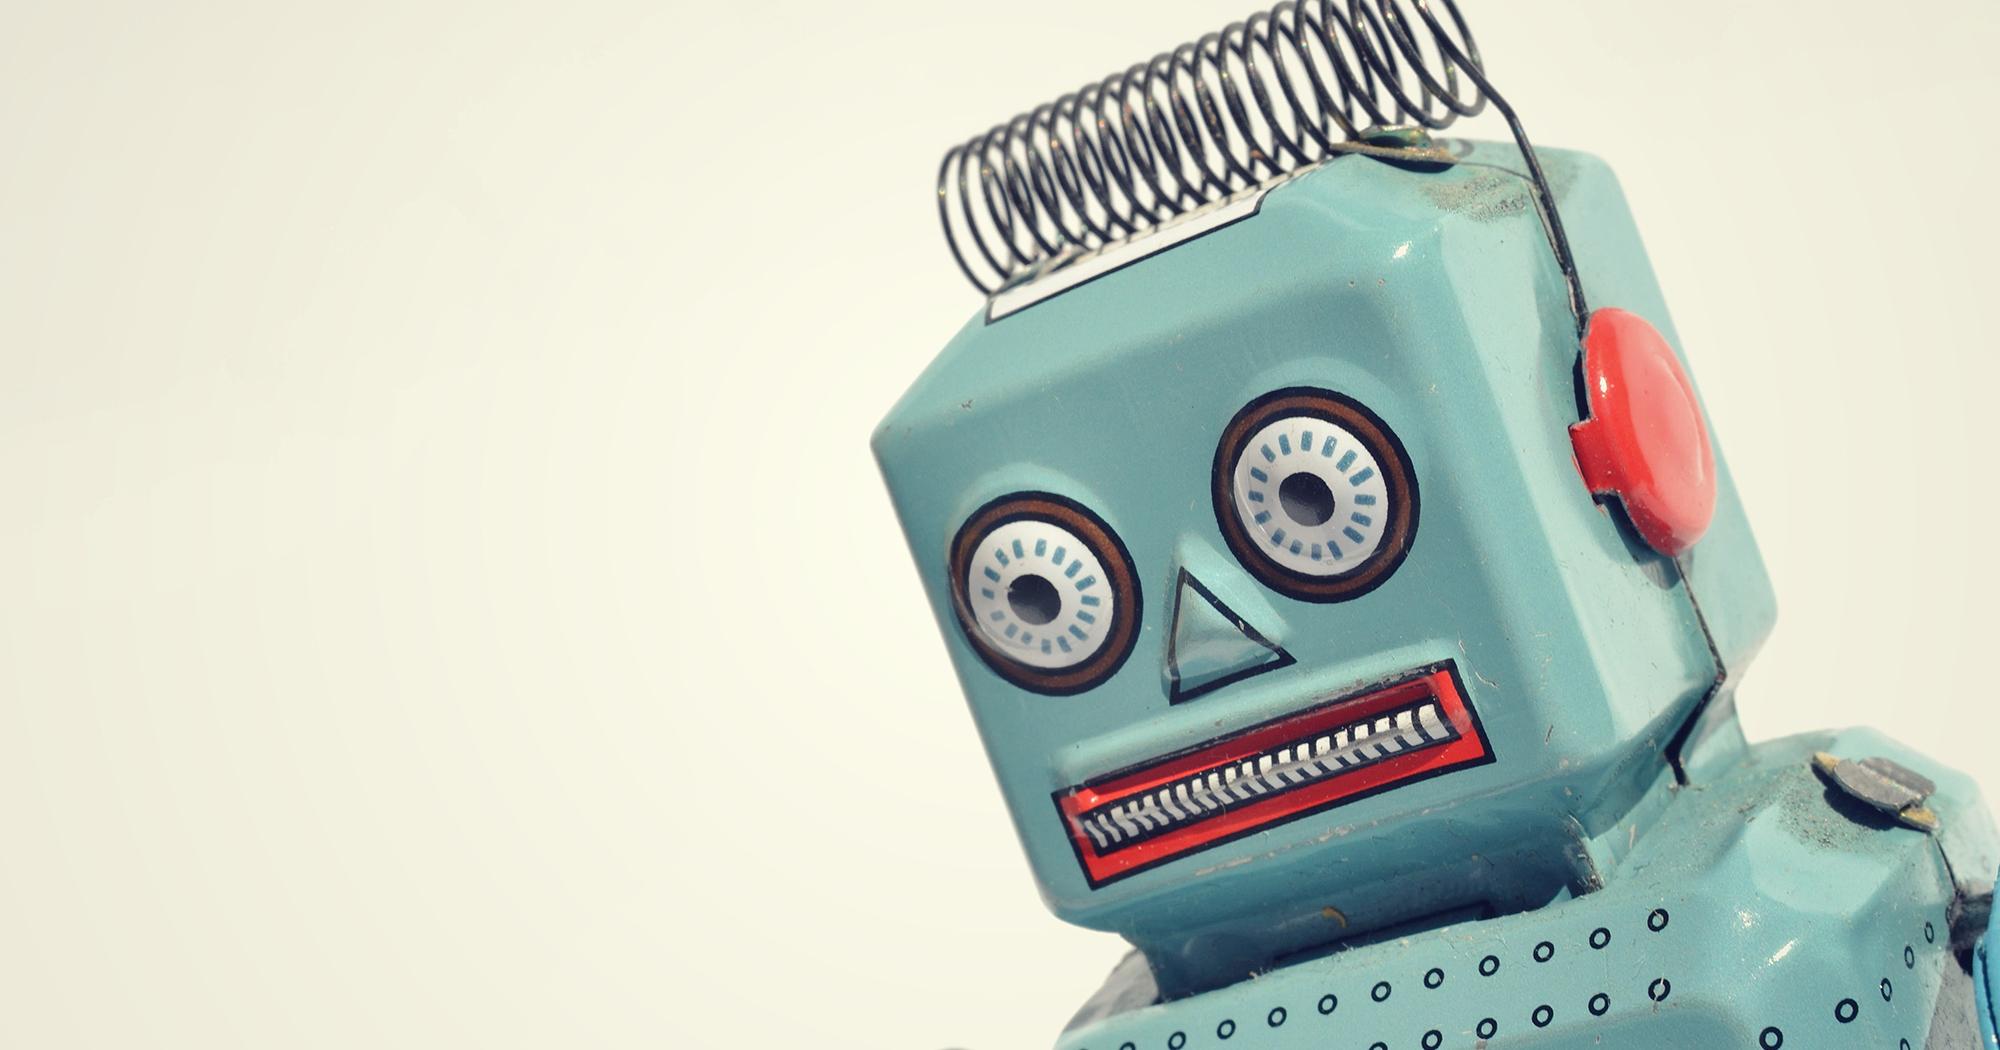 6 Ecommerce Chatbot Examples to Help Drive Sales on Autopilot